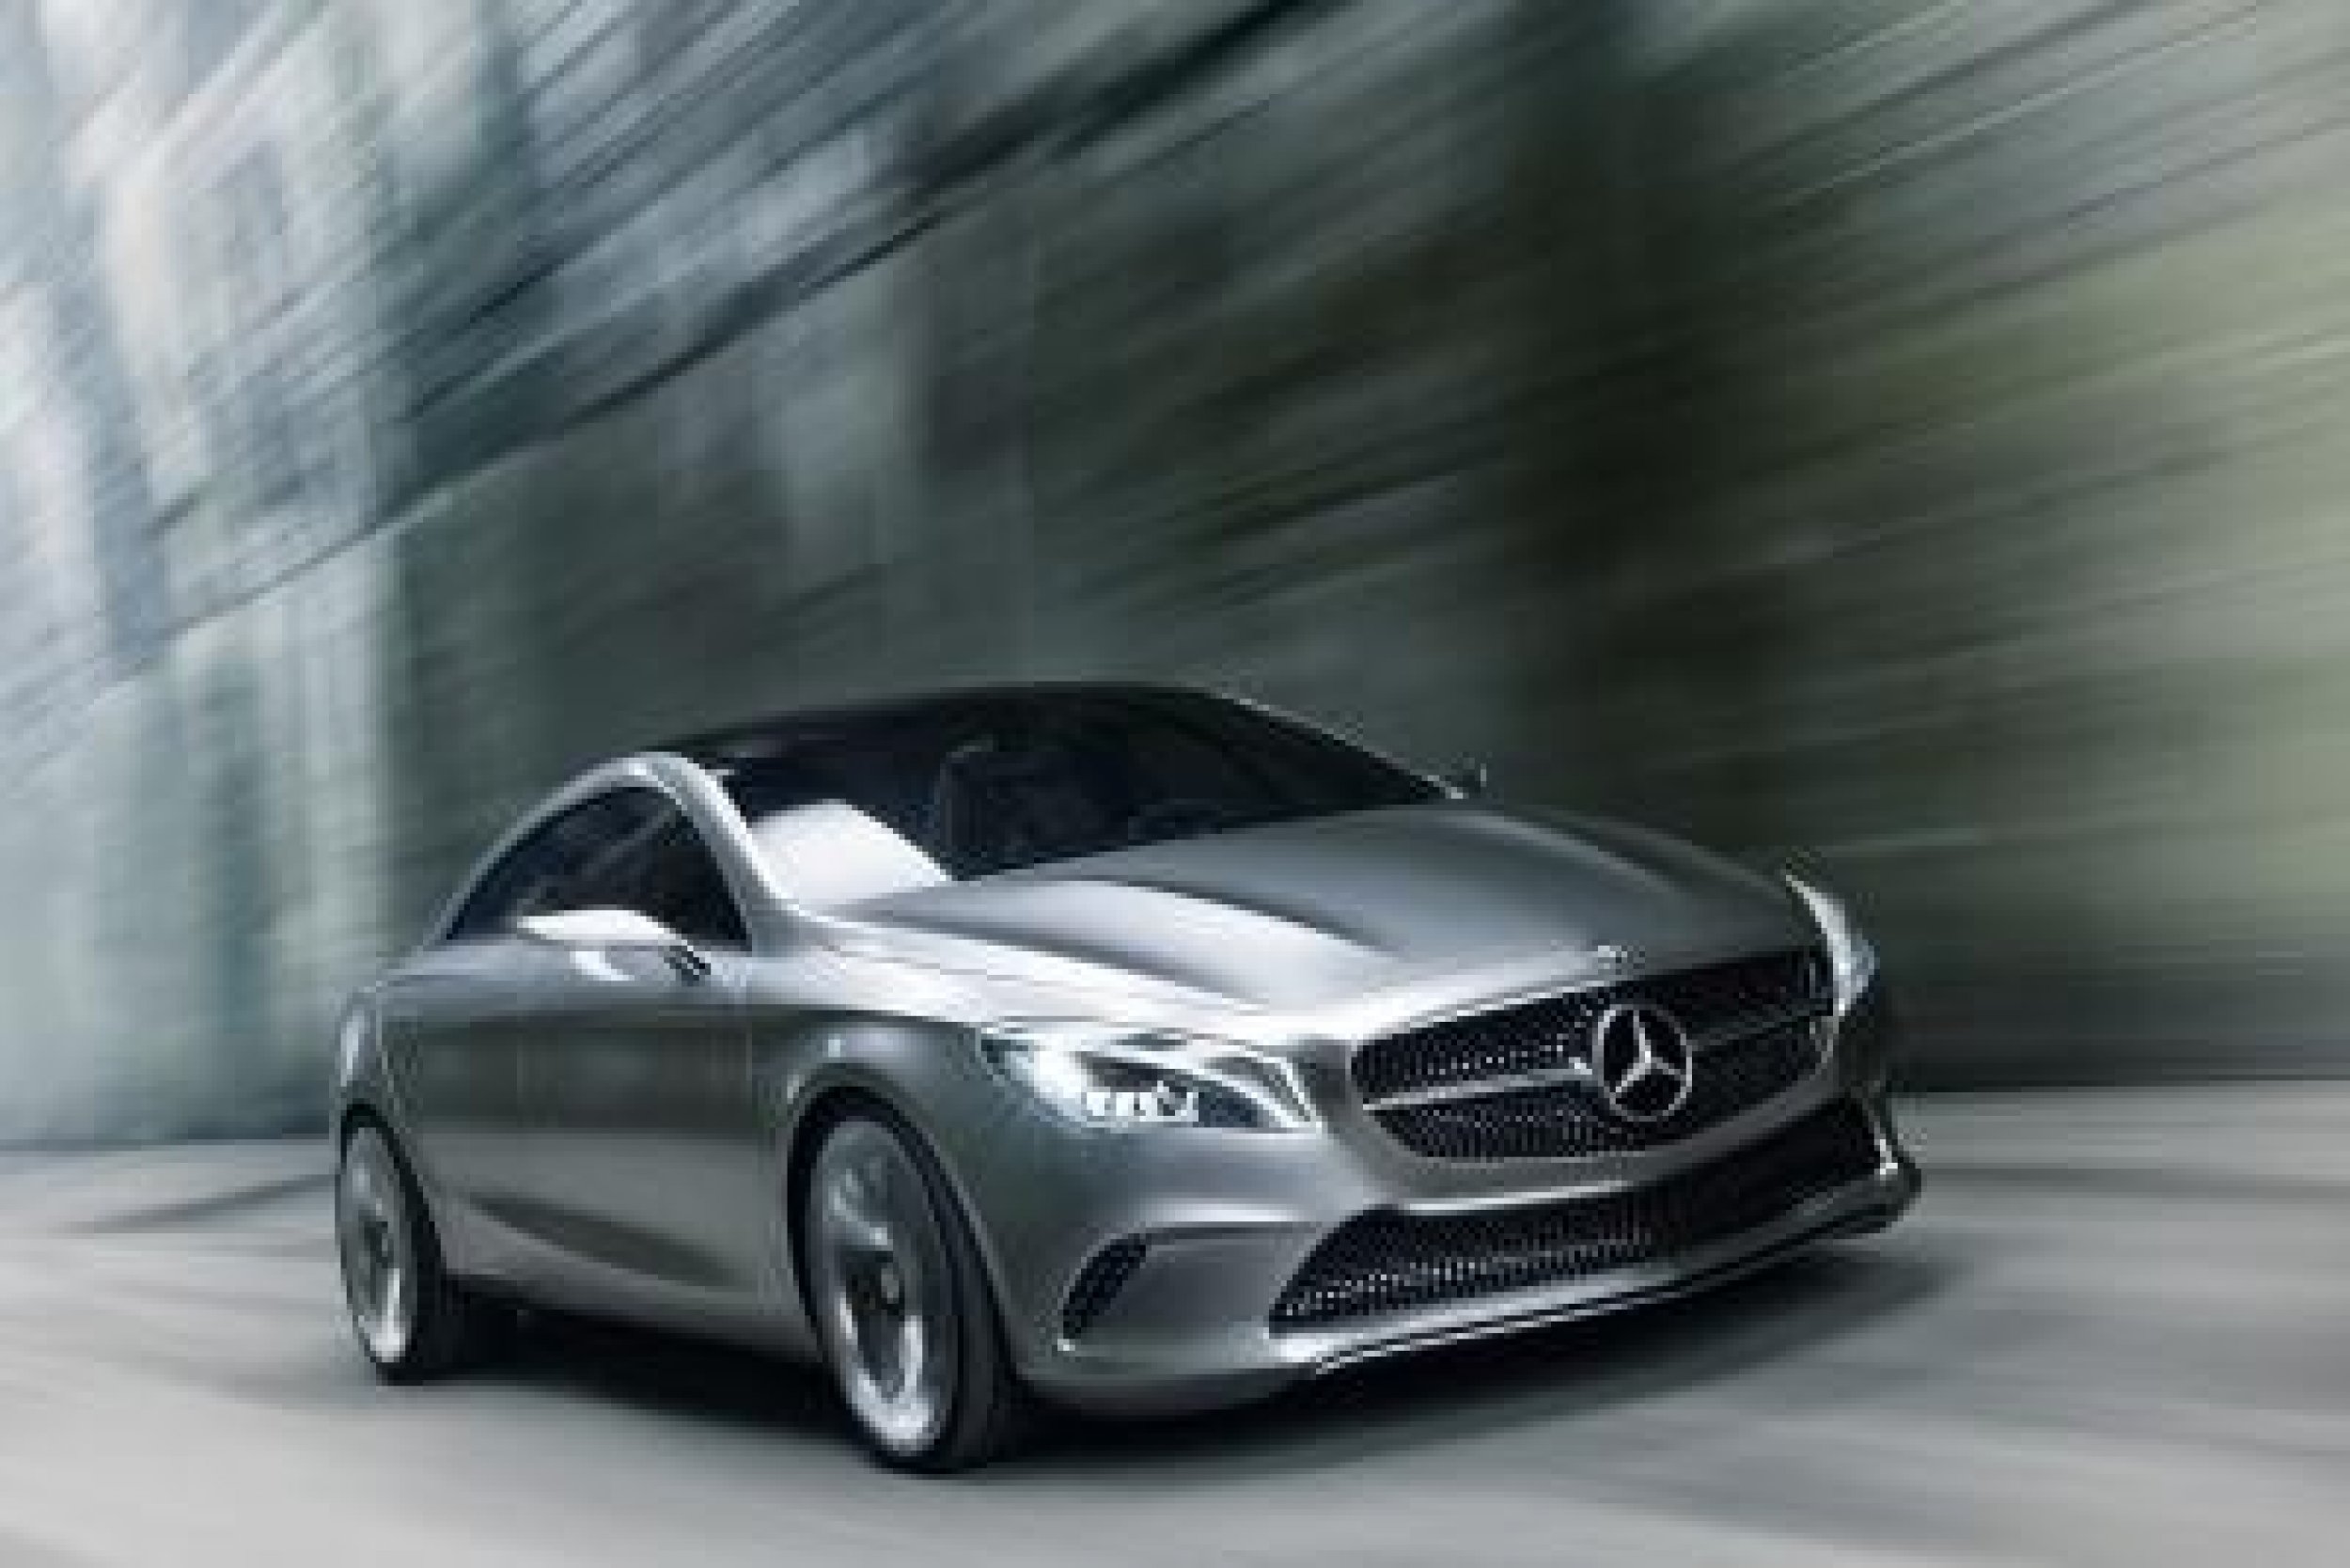 The Mercedes Concept Style Coupe has a 211 horsepower engine, but will that really make it move as fast as it looks in this picture